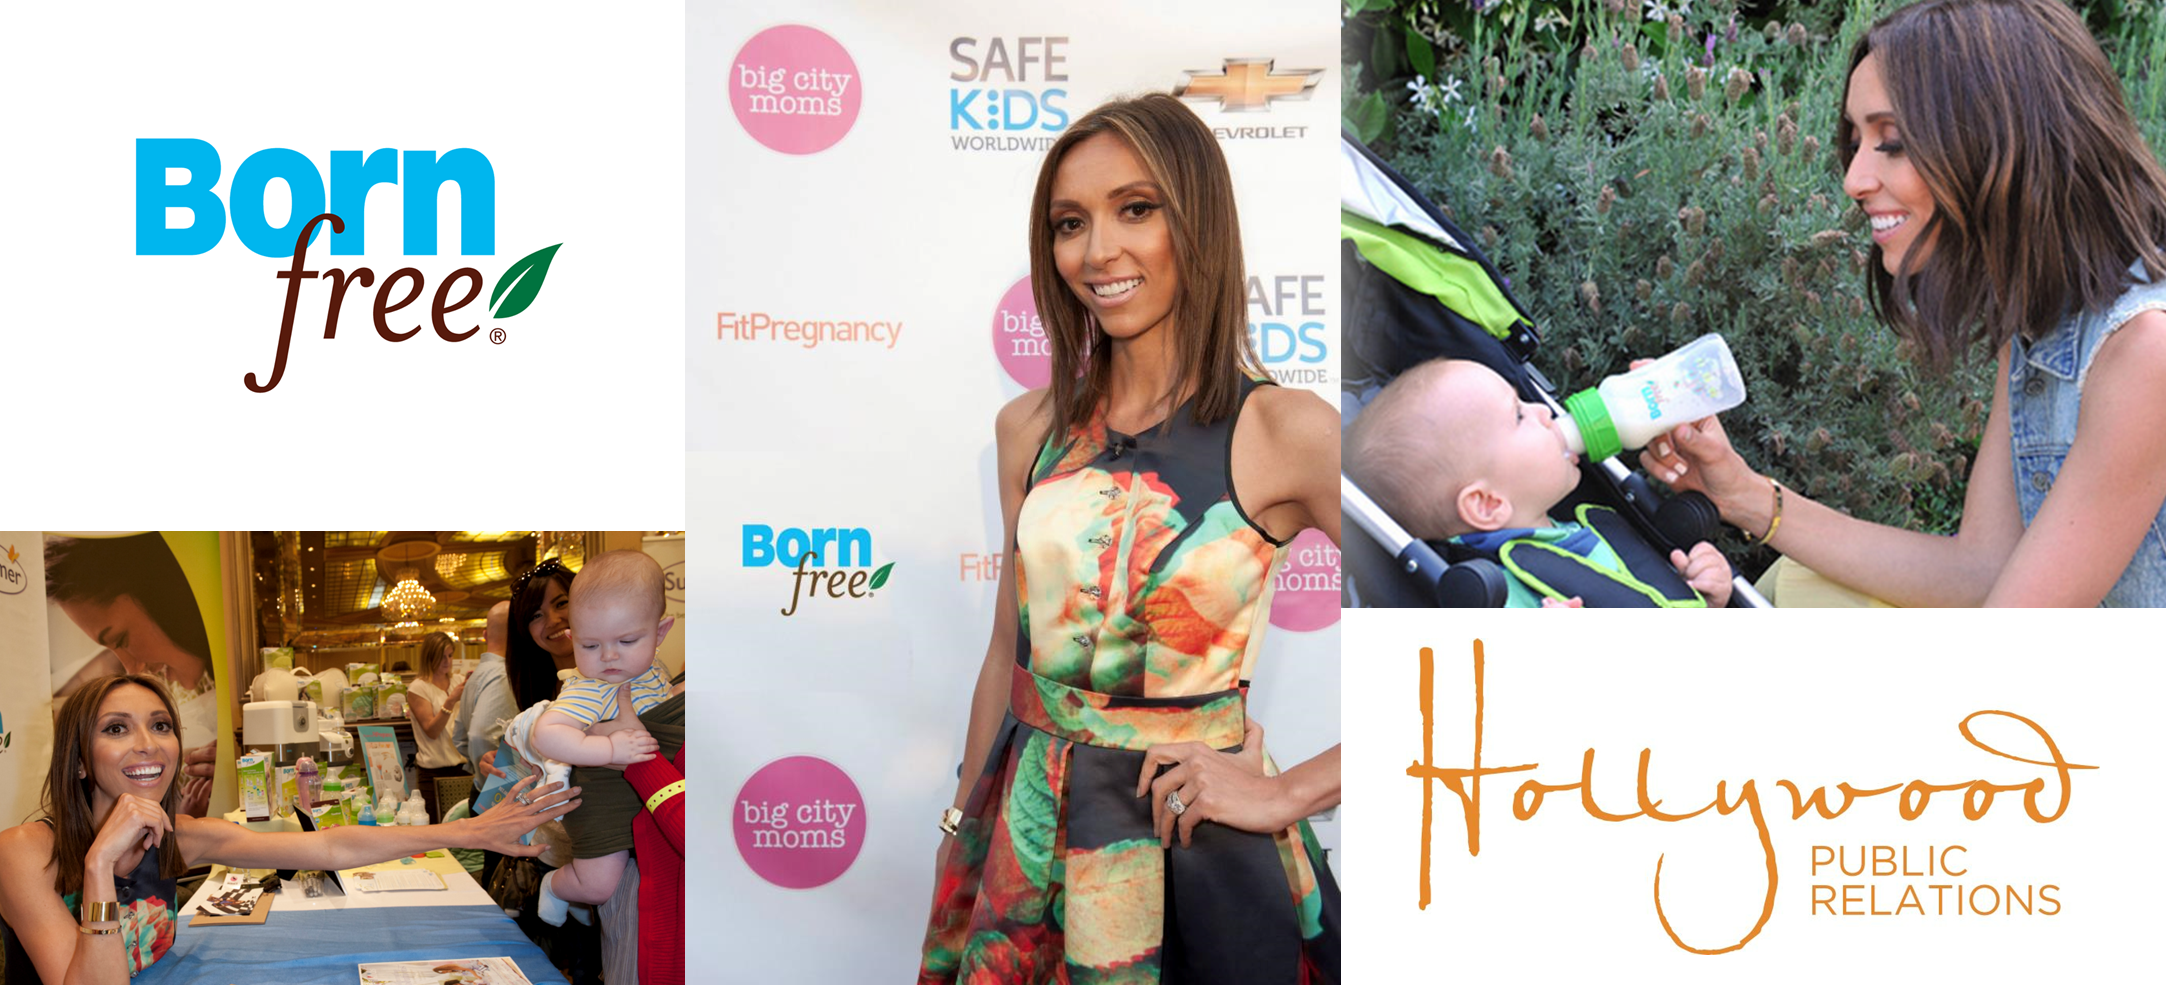 Colic Awareness Campaign with Giuliana Rancic - Logo - https://s39939.pcdn.co/wp-content/uploads/2018/11/born-free-hollywood-banner.png